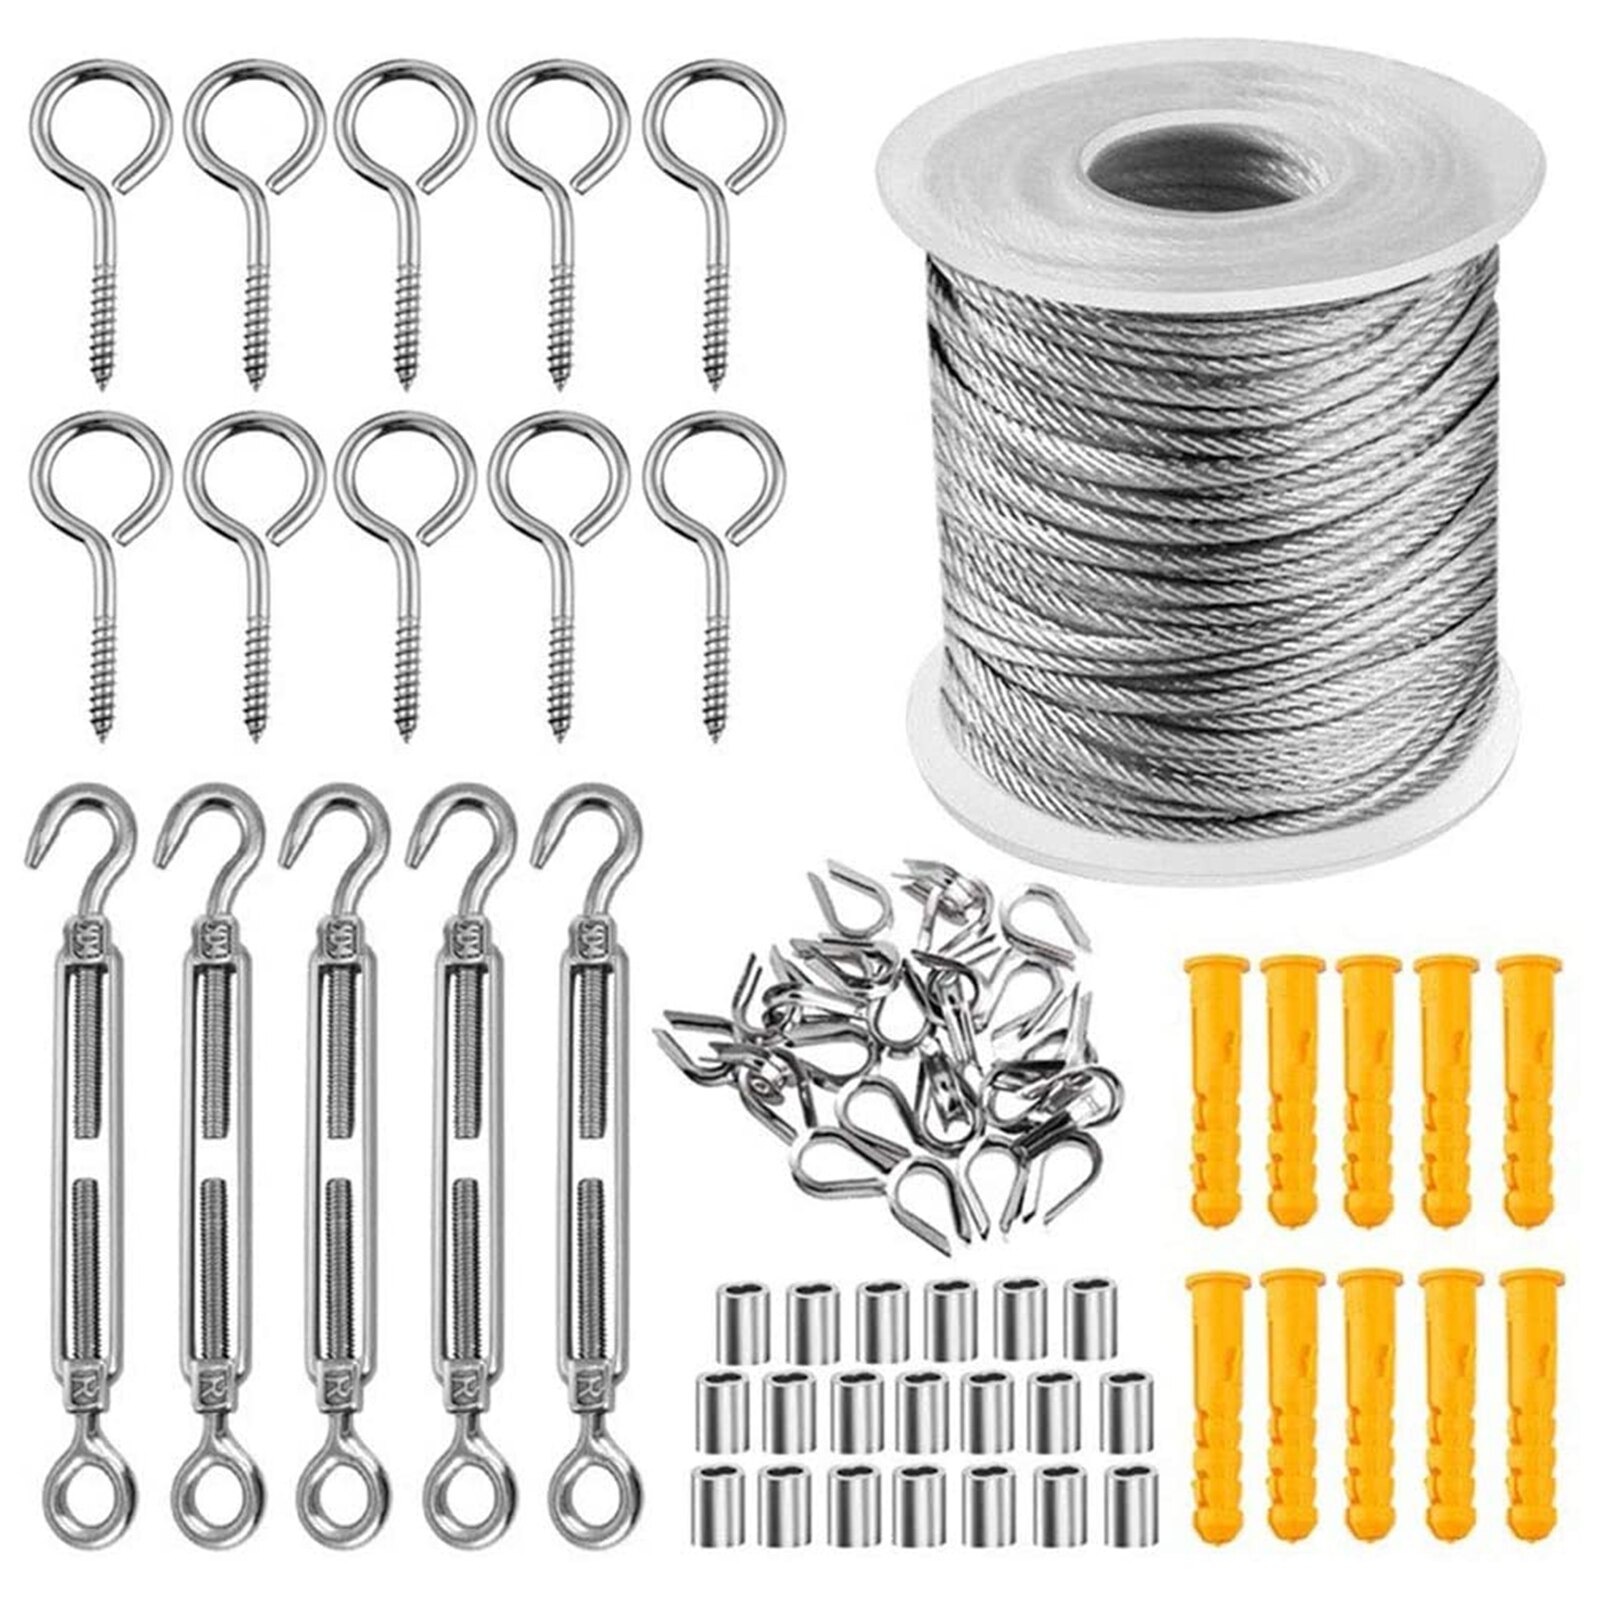 Soft Cable Stainless Steel Clothesline Flexible Wire Rope 57PCS Diameter 2mm Kit 30Meters Hooks Coated Flexible Wire Rope